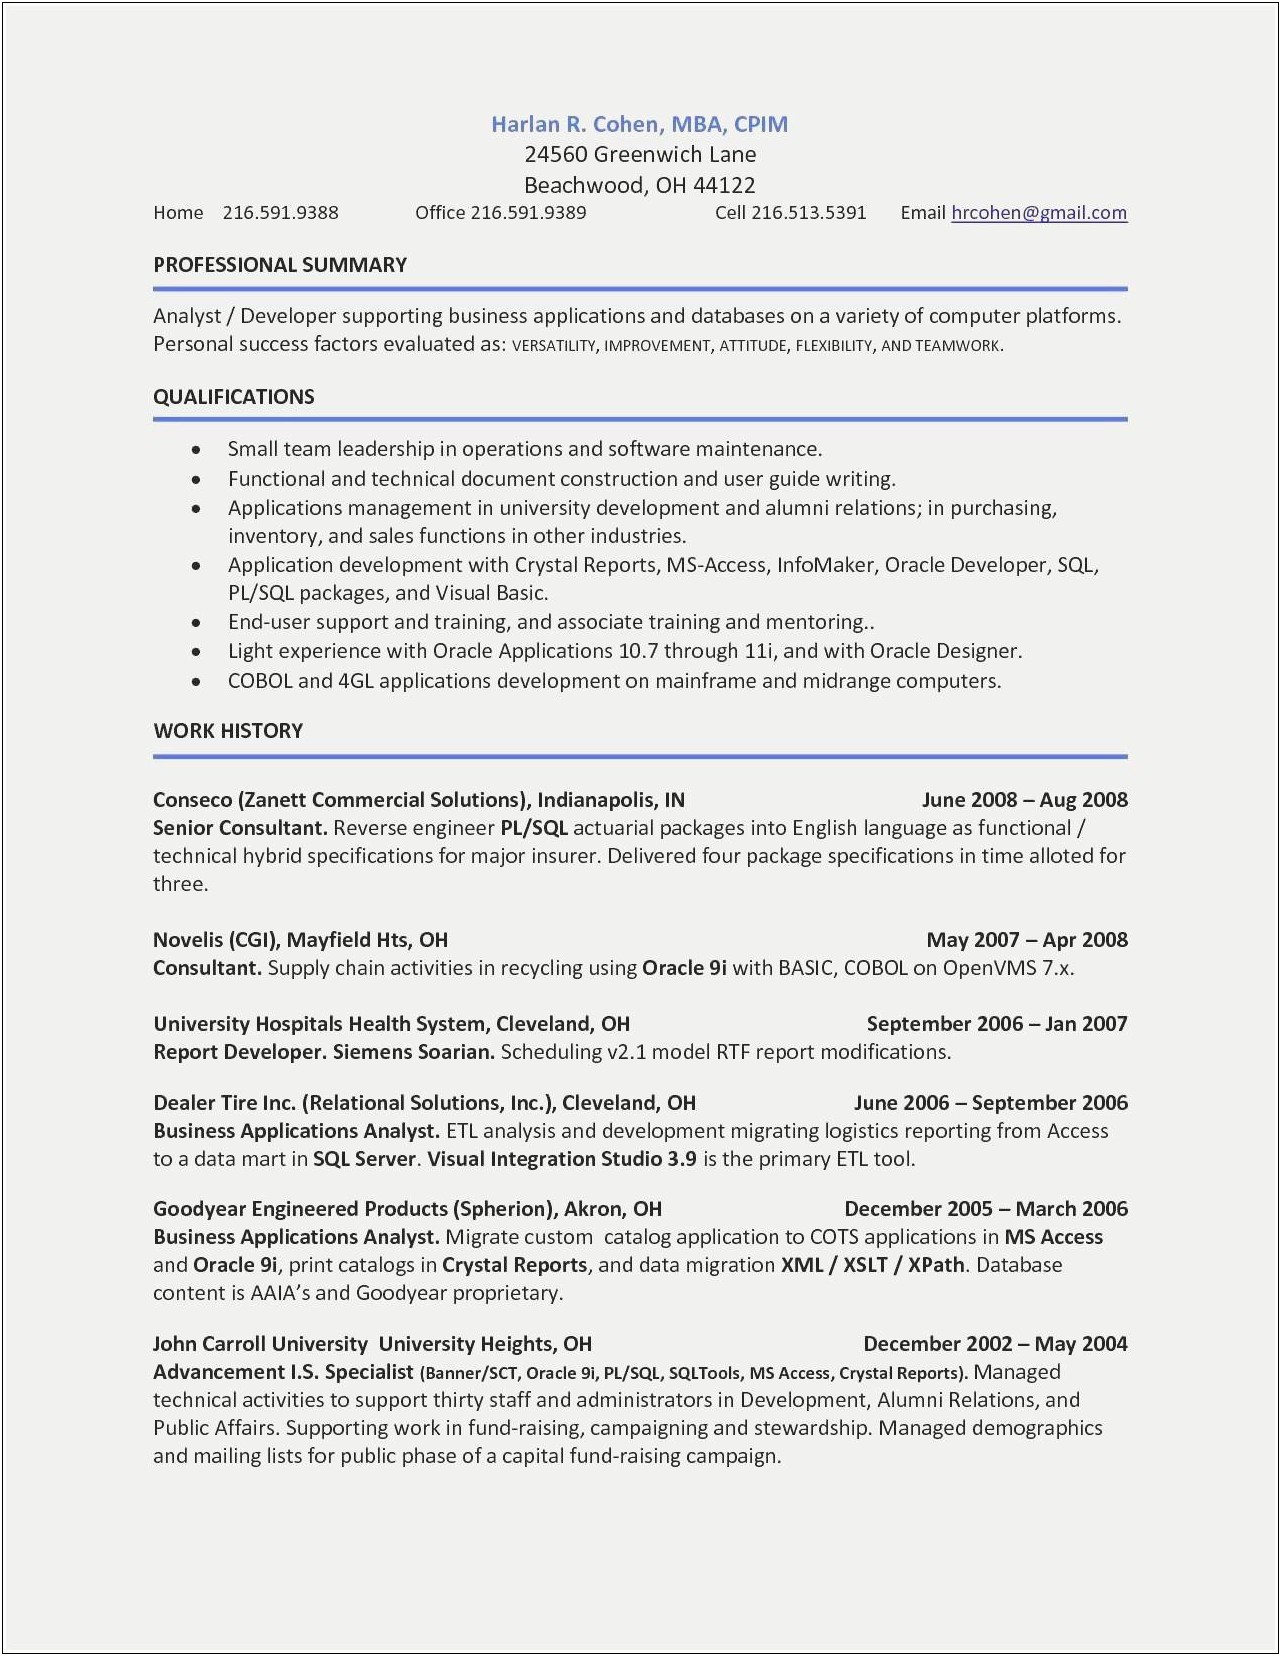 Resume Summary Statement Examples For Accounting